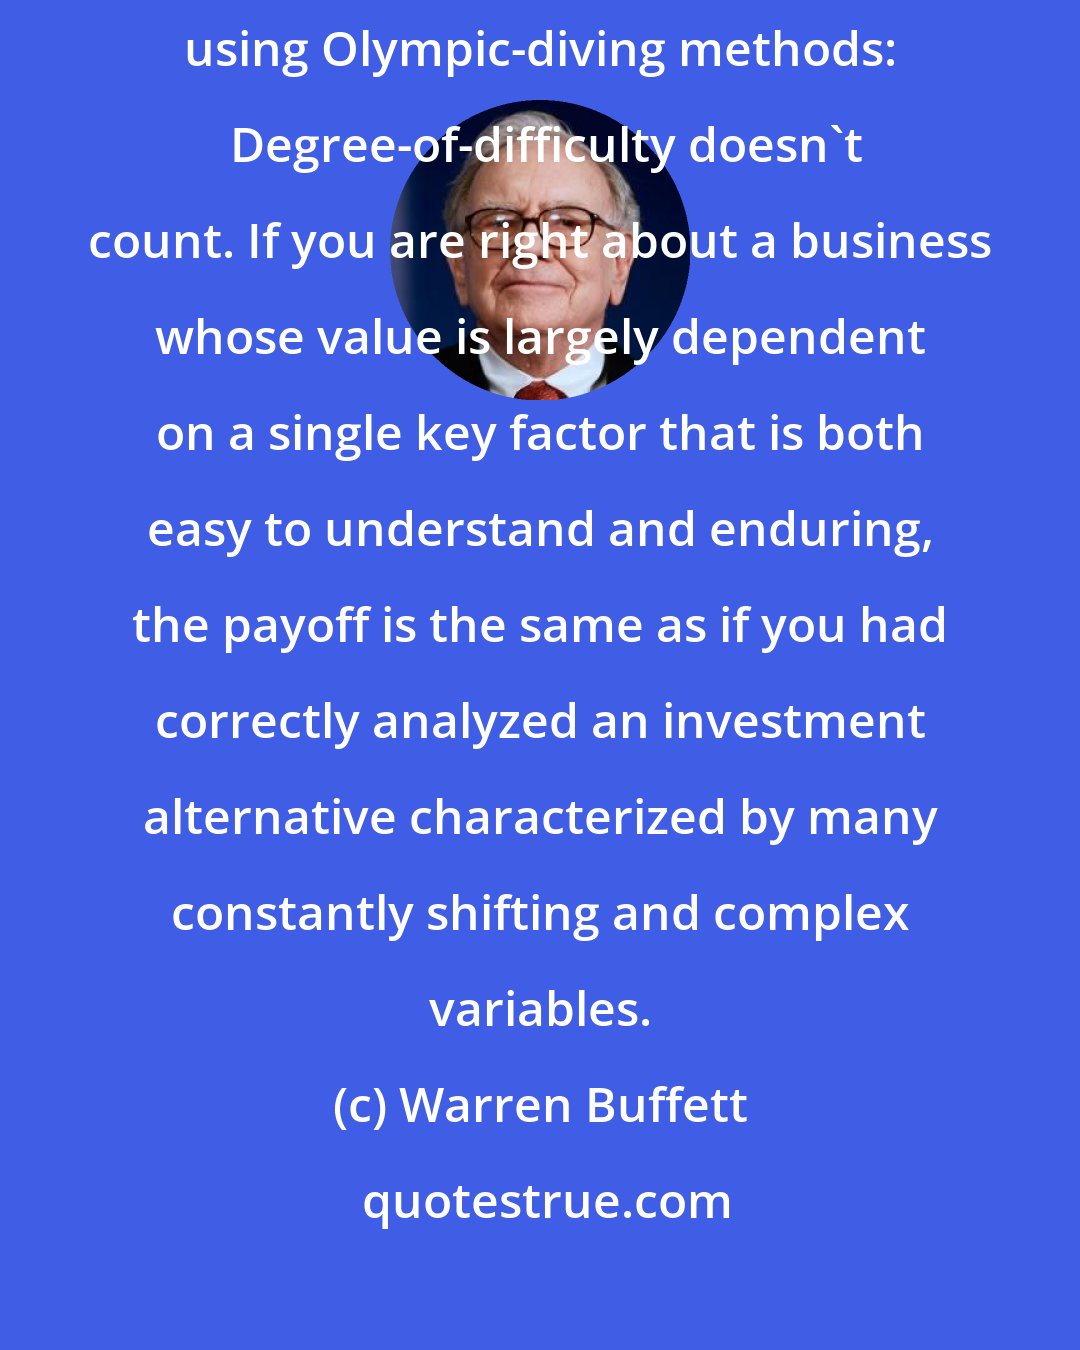 Warren Buffett: Investors should remember that their scorecard is not computed using Olympic-diving methods:  Degree-of-difficulty doesn't count. If you are right about a business whose value is largely dependent on a single key factor that is both easy to understand and enduring, the payoff is the same as if you had correctly analyzed an investment alternative characterized by many constantly shifting and complex variables.